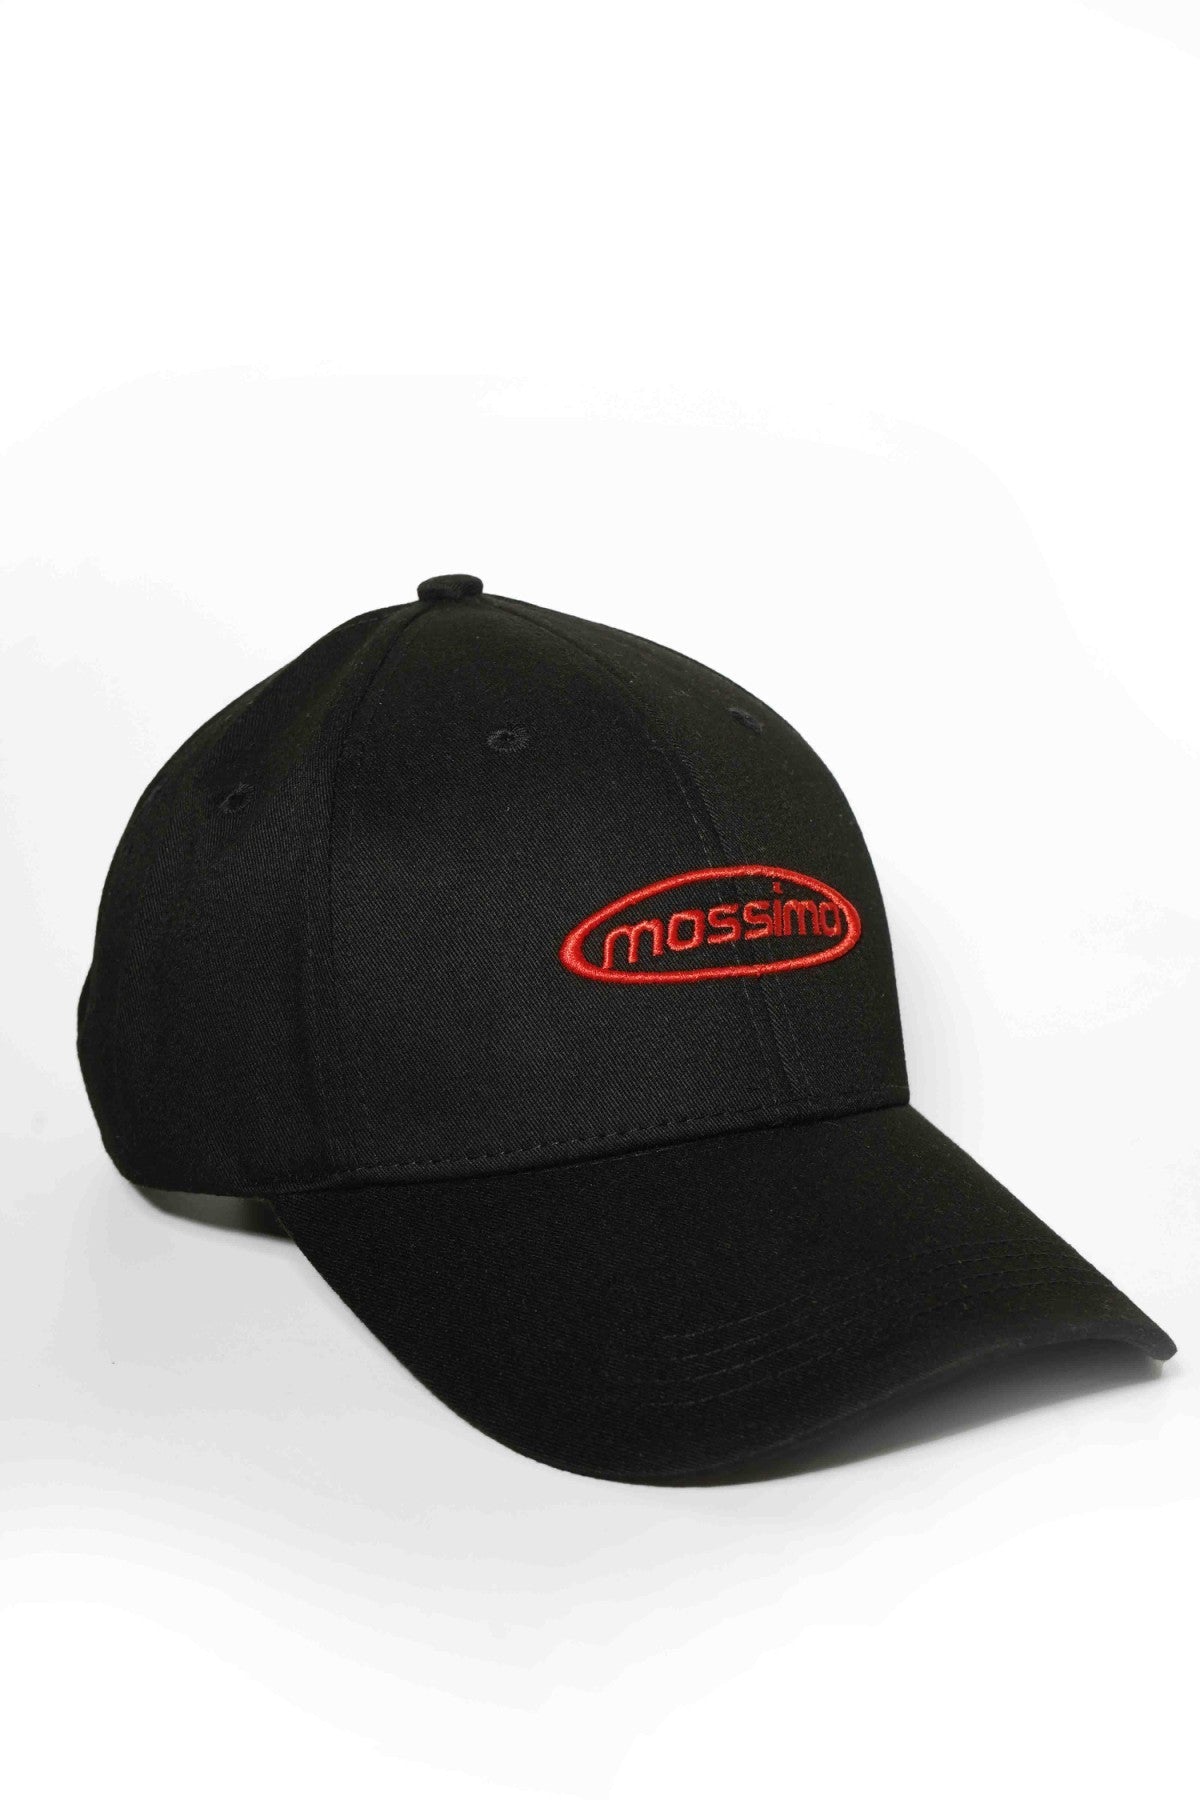 Mossimo Black Baseball Cap with Direct Embroidery - Mossimo PH